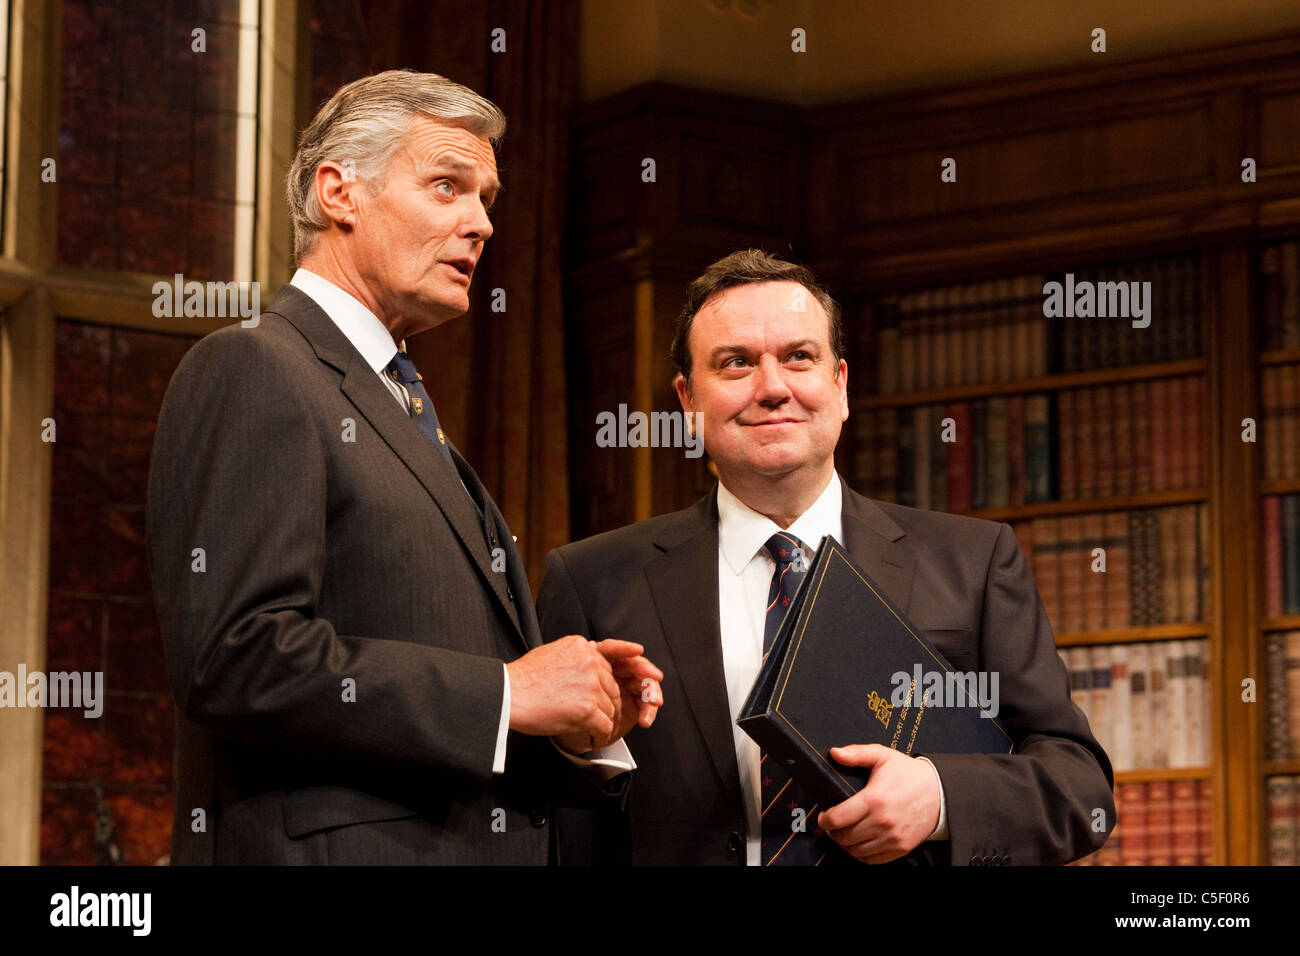 Simon Williams as 'Sir Humphrey Appleby' and Richard McCabe as 'Jim Hacker, Prime Minister' in 'Yes, Prime Minister' Stock Photo